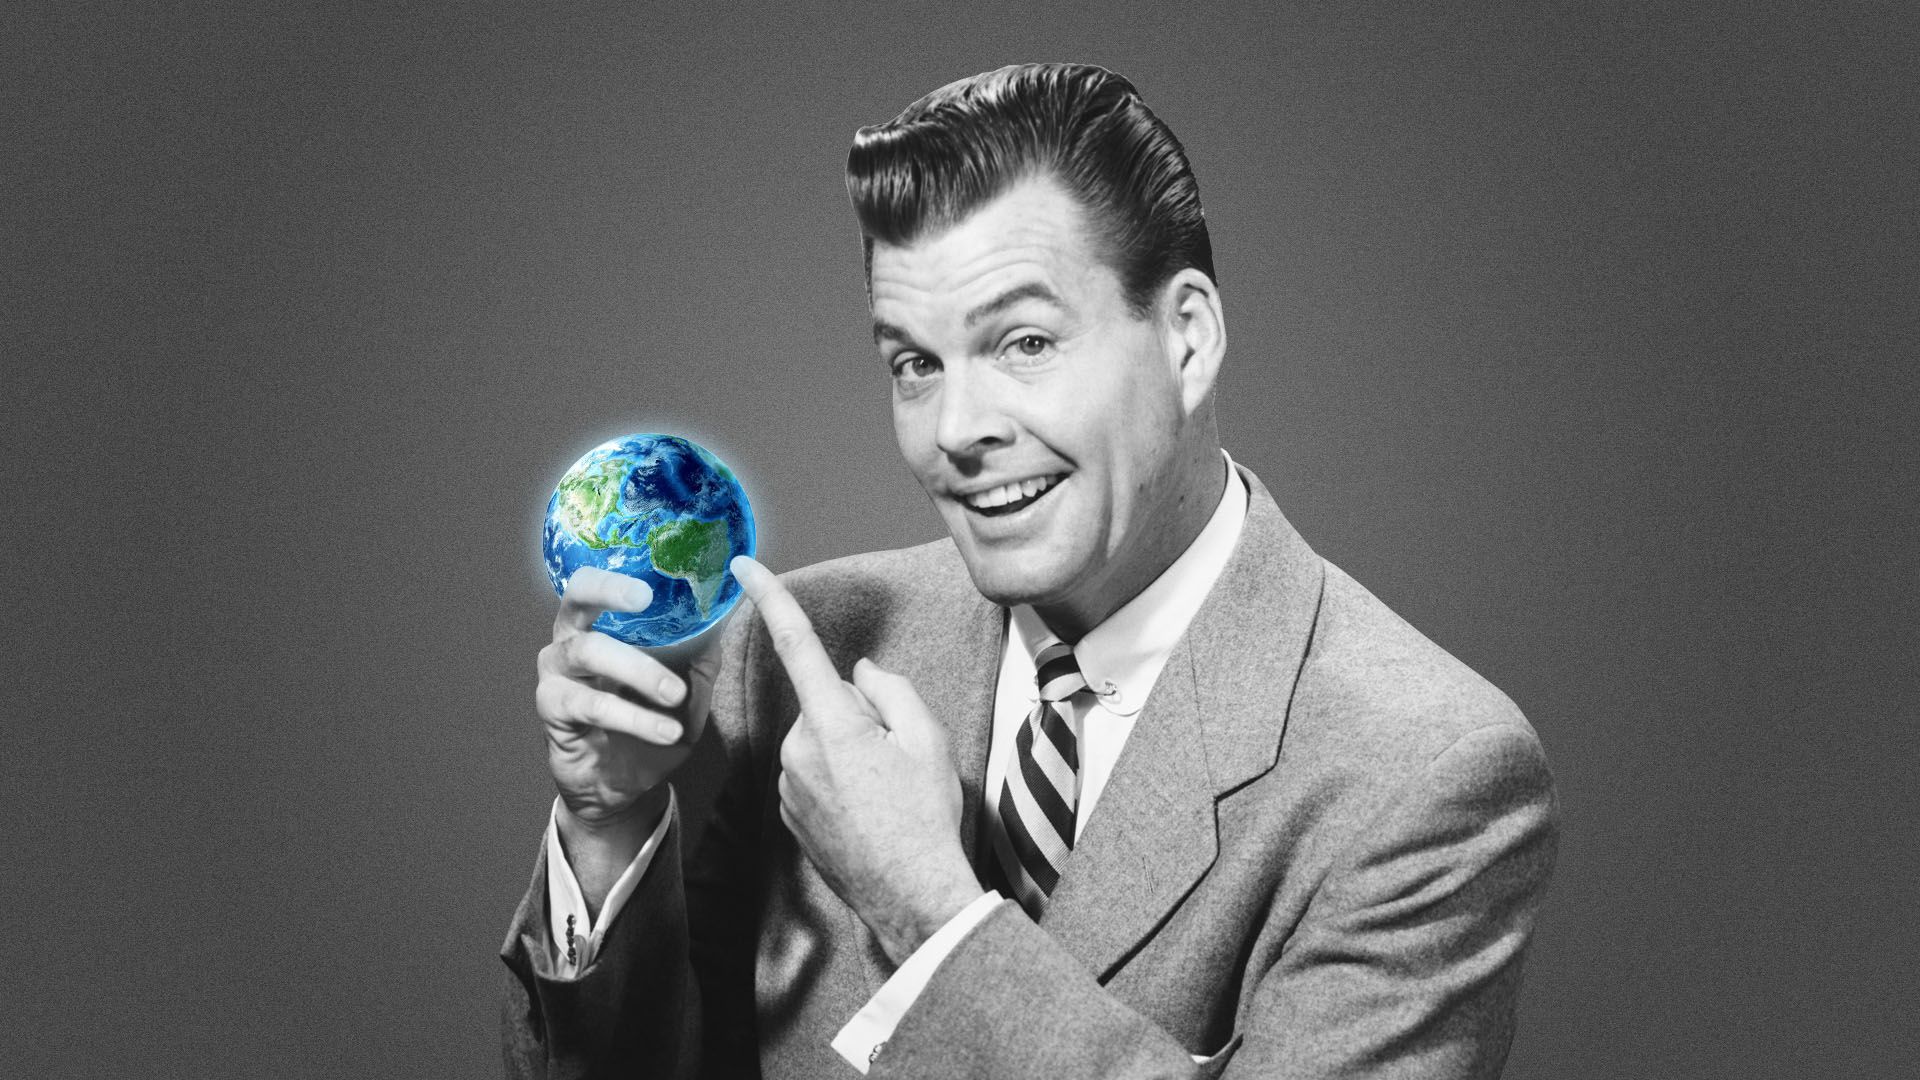 Man who looks like a corporate executive holding a small Earth-shaped ball and pointing to it.